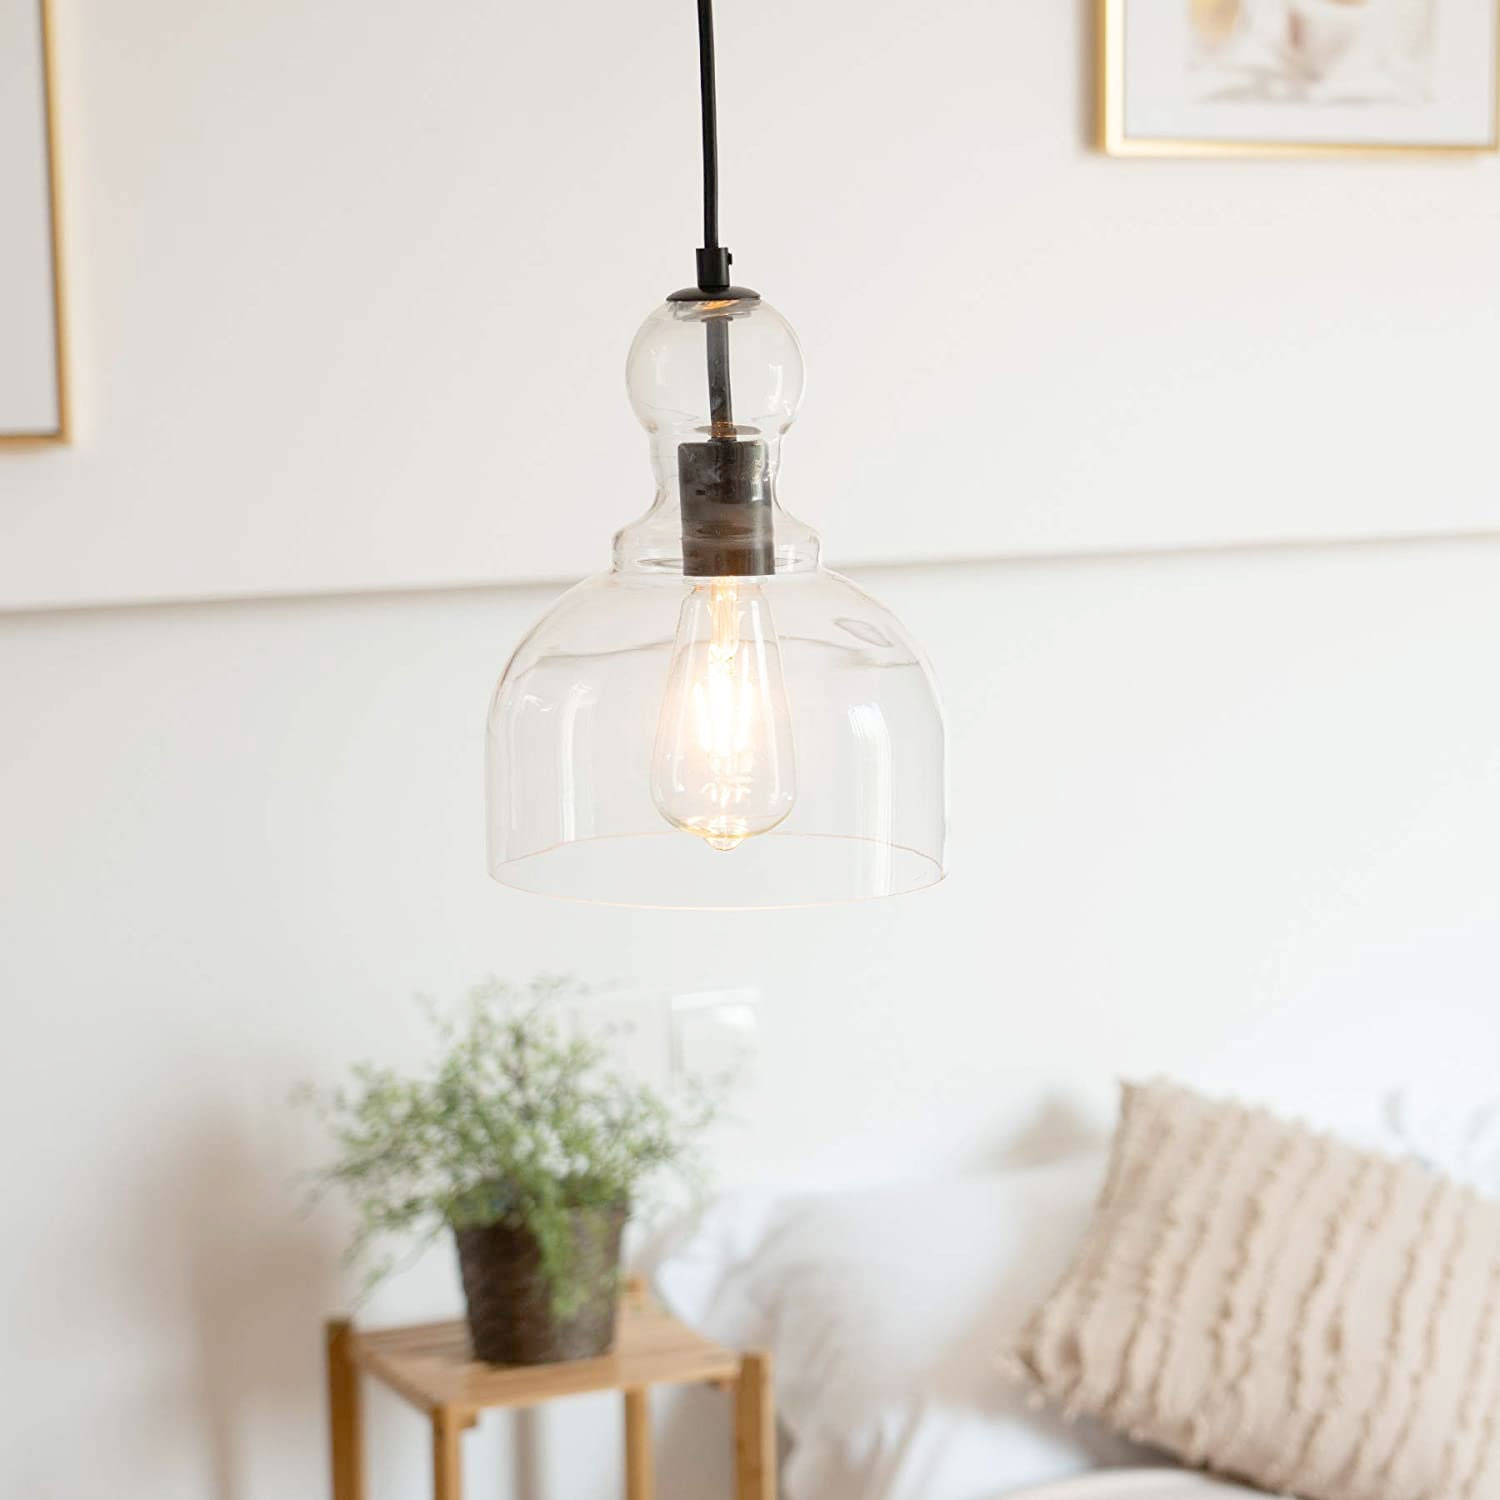 Amazon：CO-Z 150cm Adjustable Height Industrial and Vintage Farmhouse Suspended Single Pendant Lighting只卖$34.99